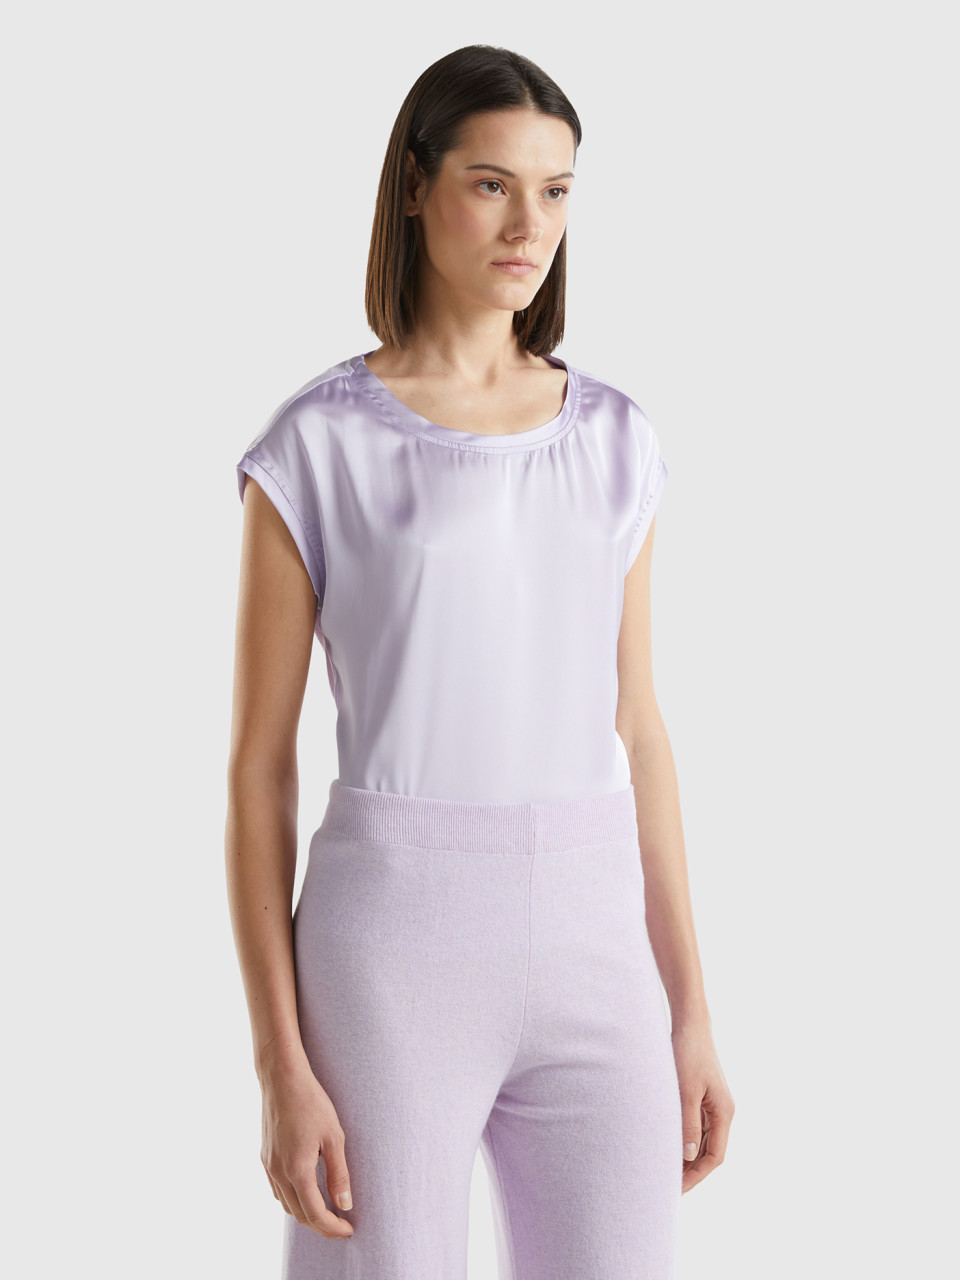 Benetton, Blouse With Boat Neck, Lilac, Women